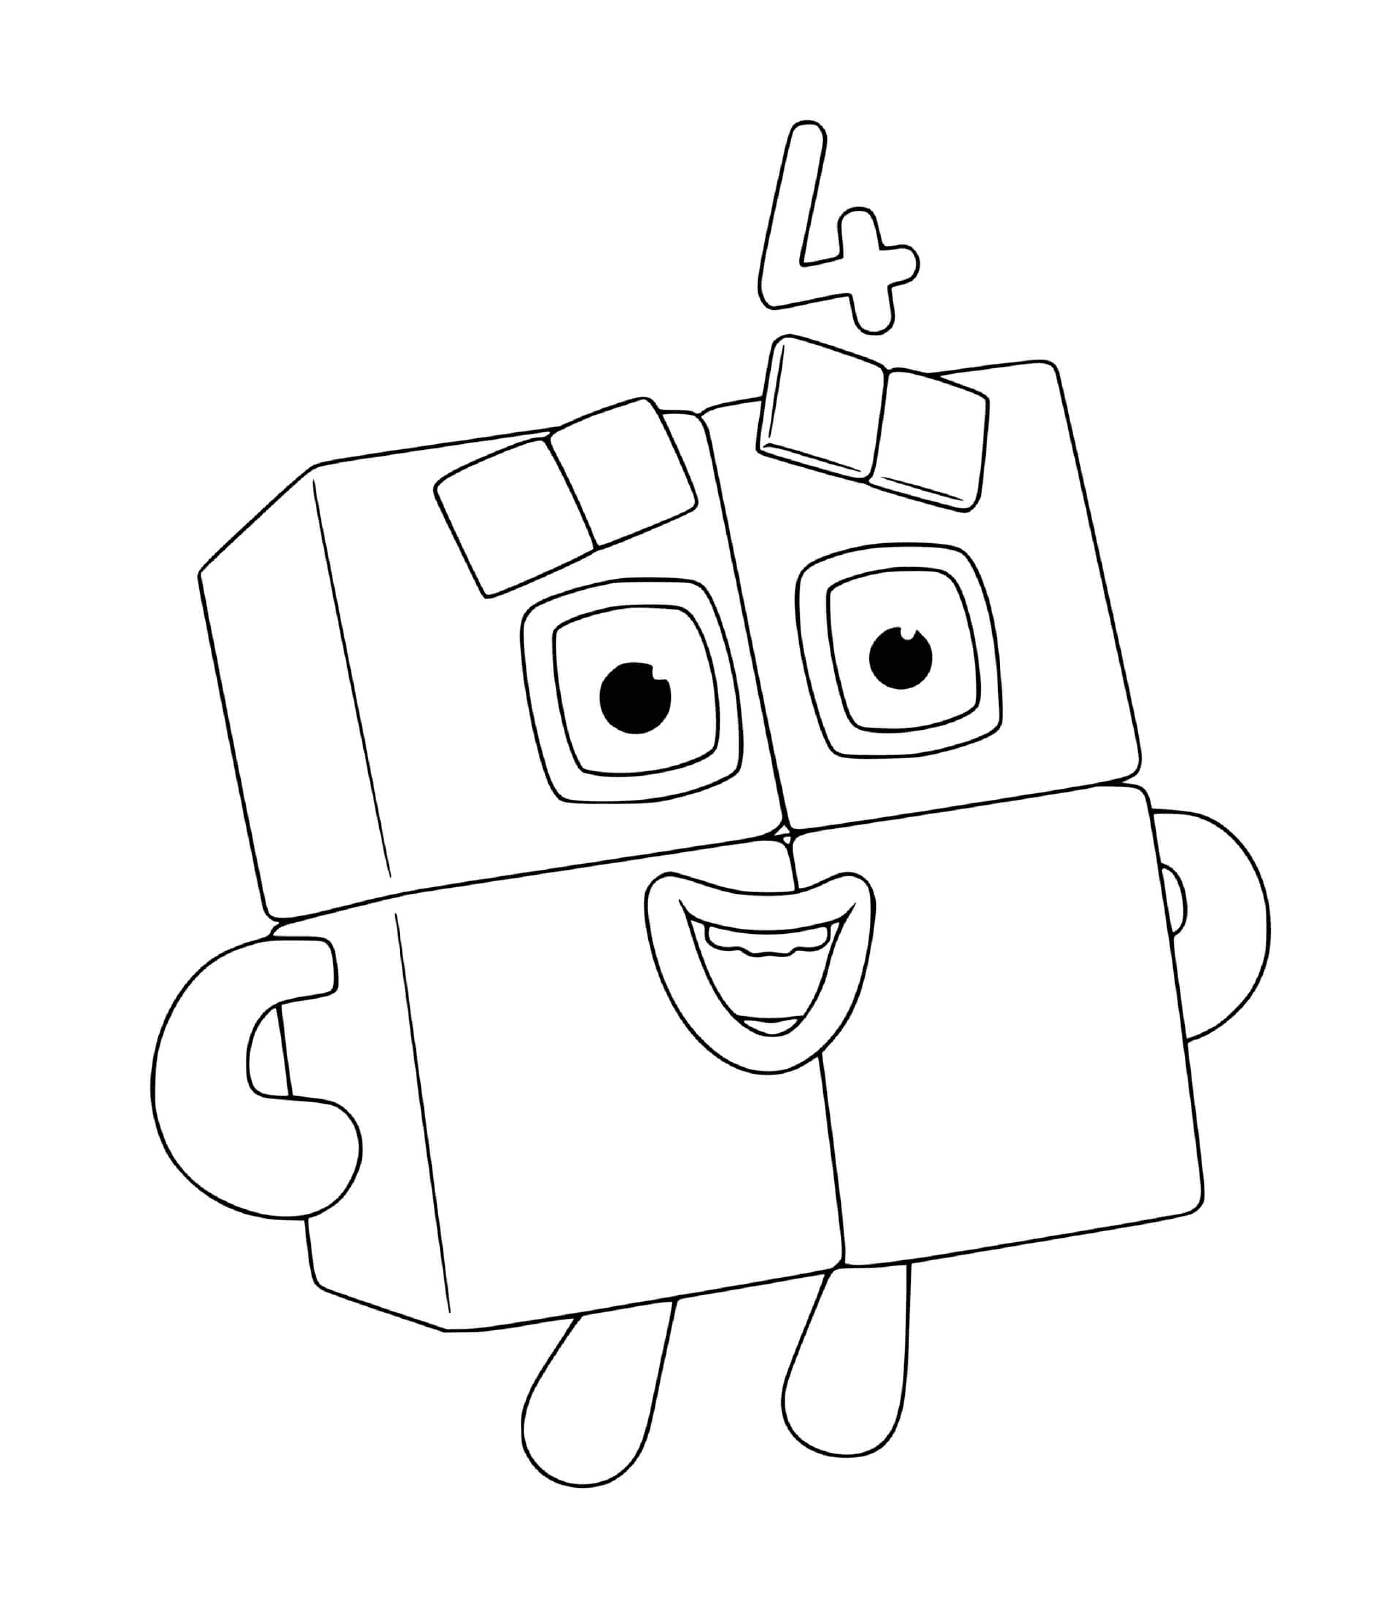  Numberblocks number 4, a toy robot 